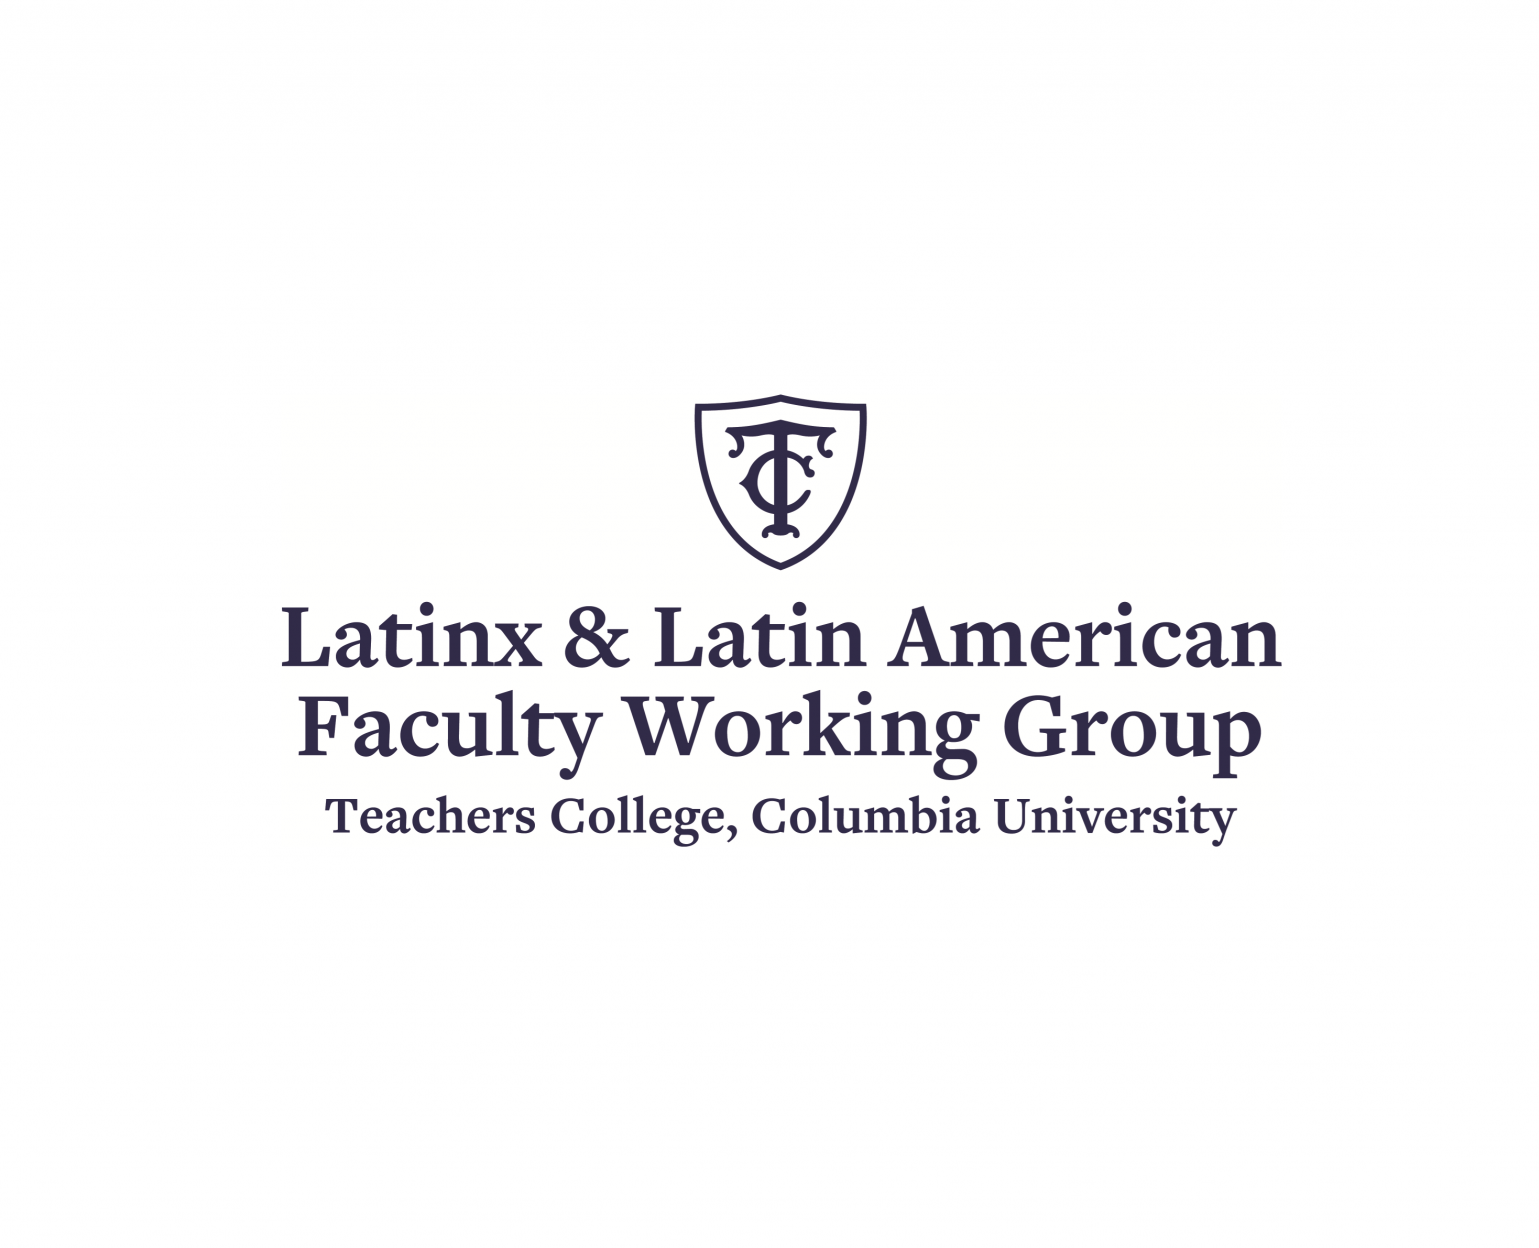 Latinx & Latin American Faculty Working Group